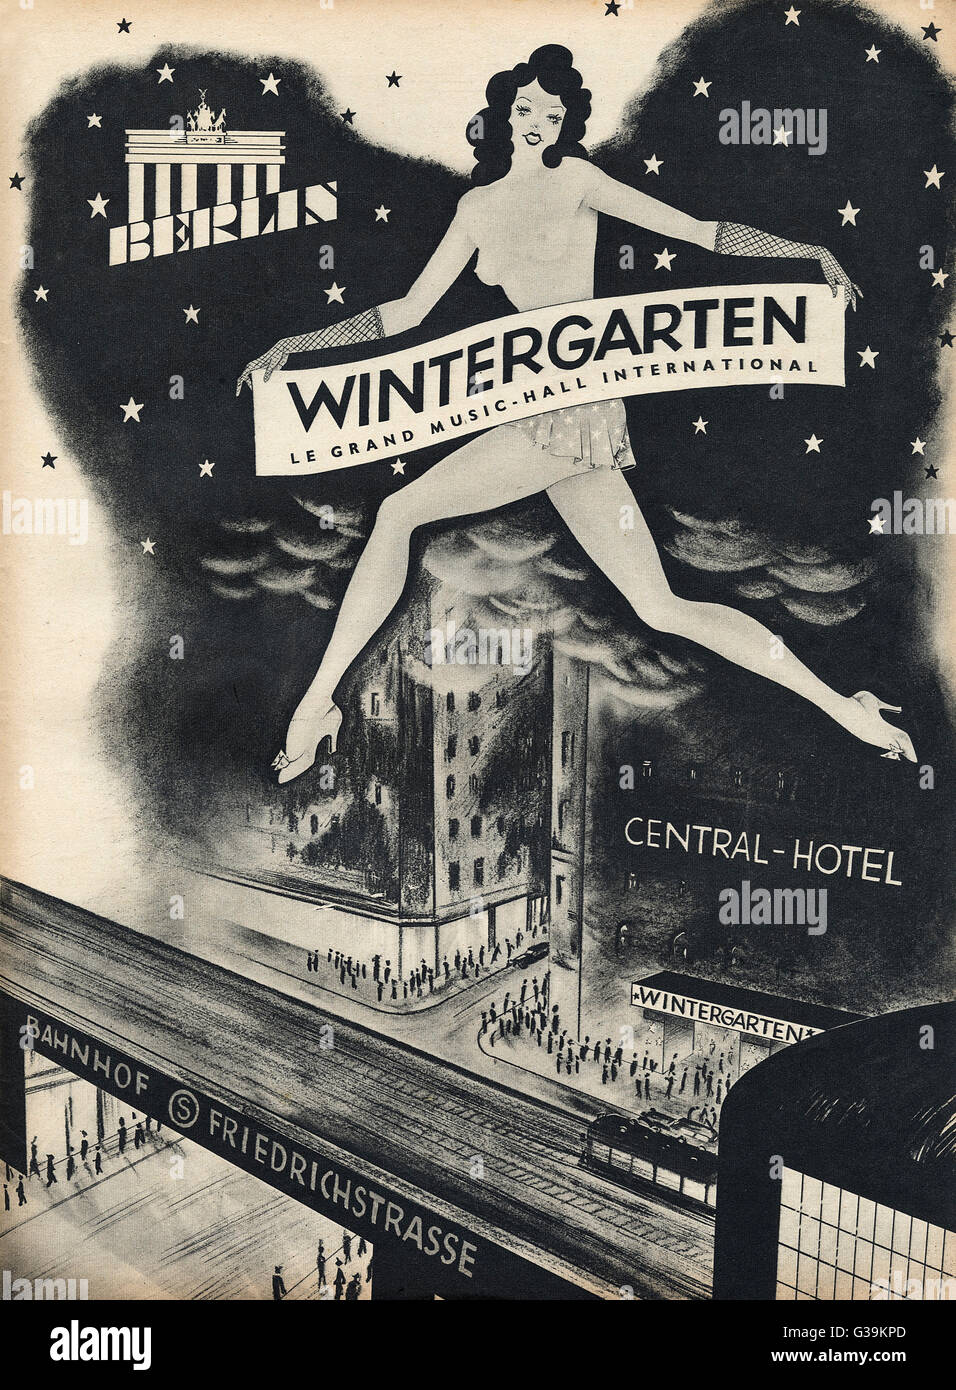 This advertisement for the  Wintergarten music hall at the  Central Hotel, Berlin, shows  that Berliners were able to  enjoy the pleasures of night  life, despite the enemy     Date: September 1941 Stock Photo